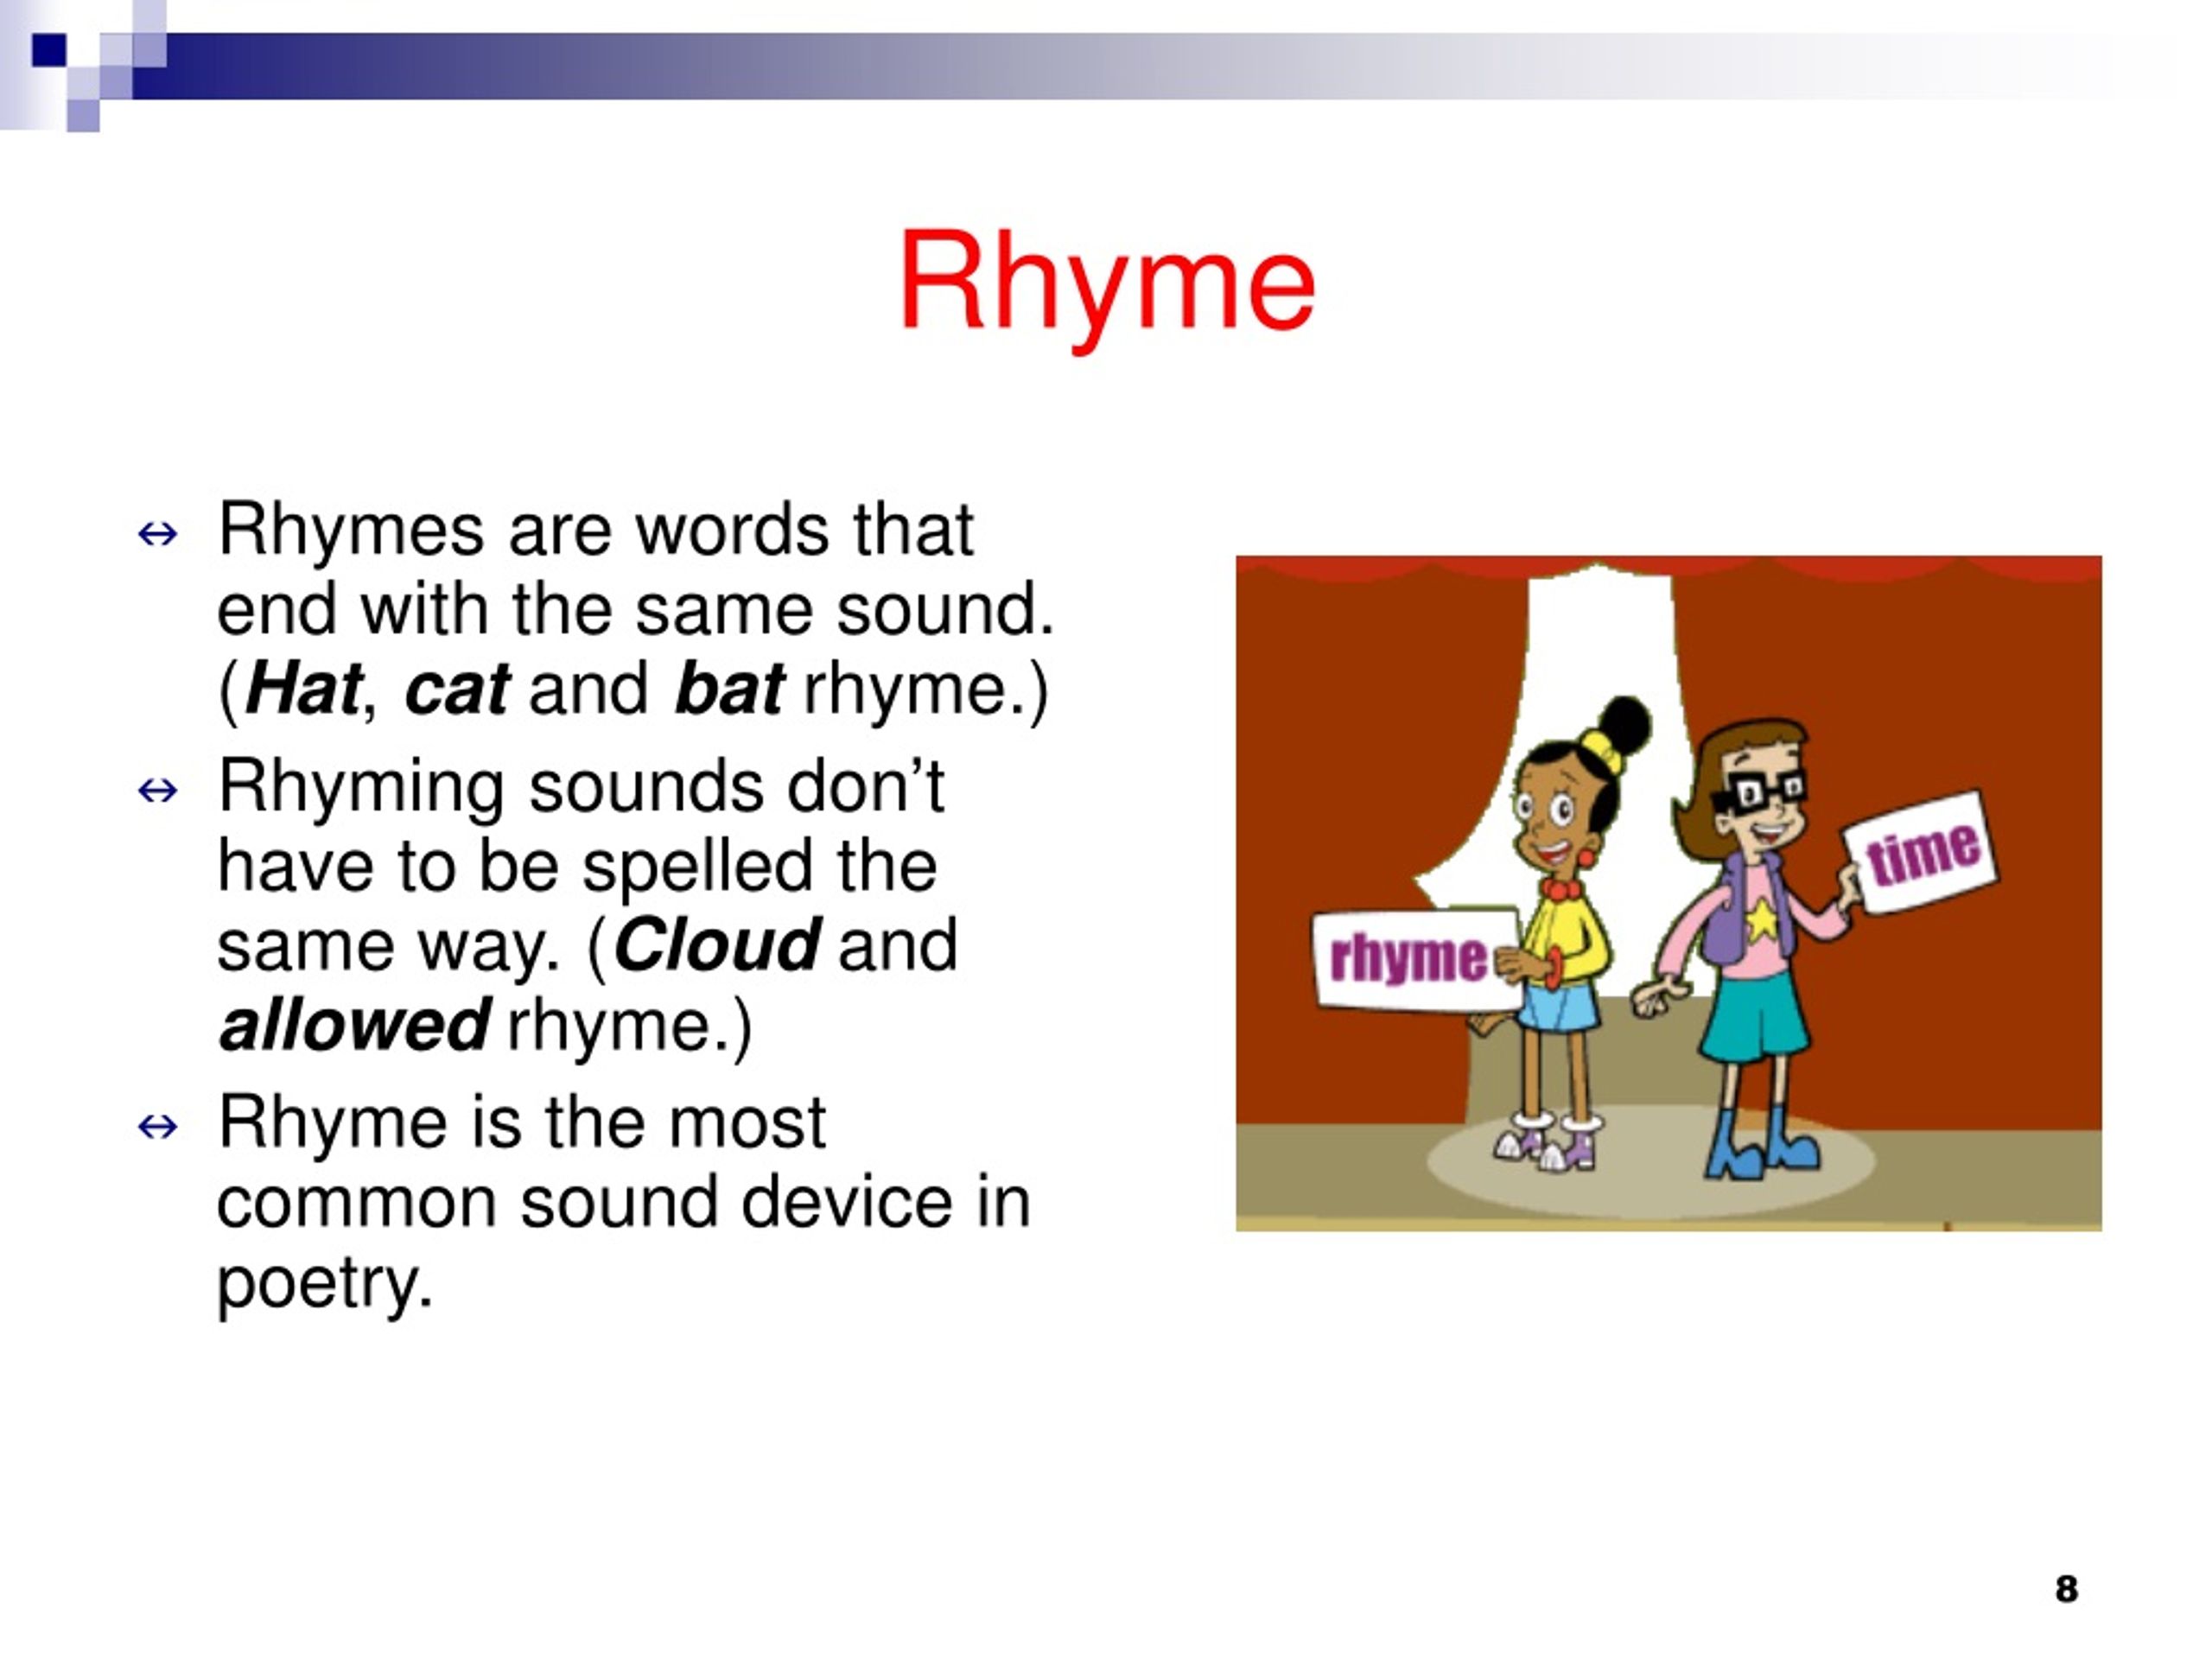 Rhymes are words that end with the same sound. 